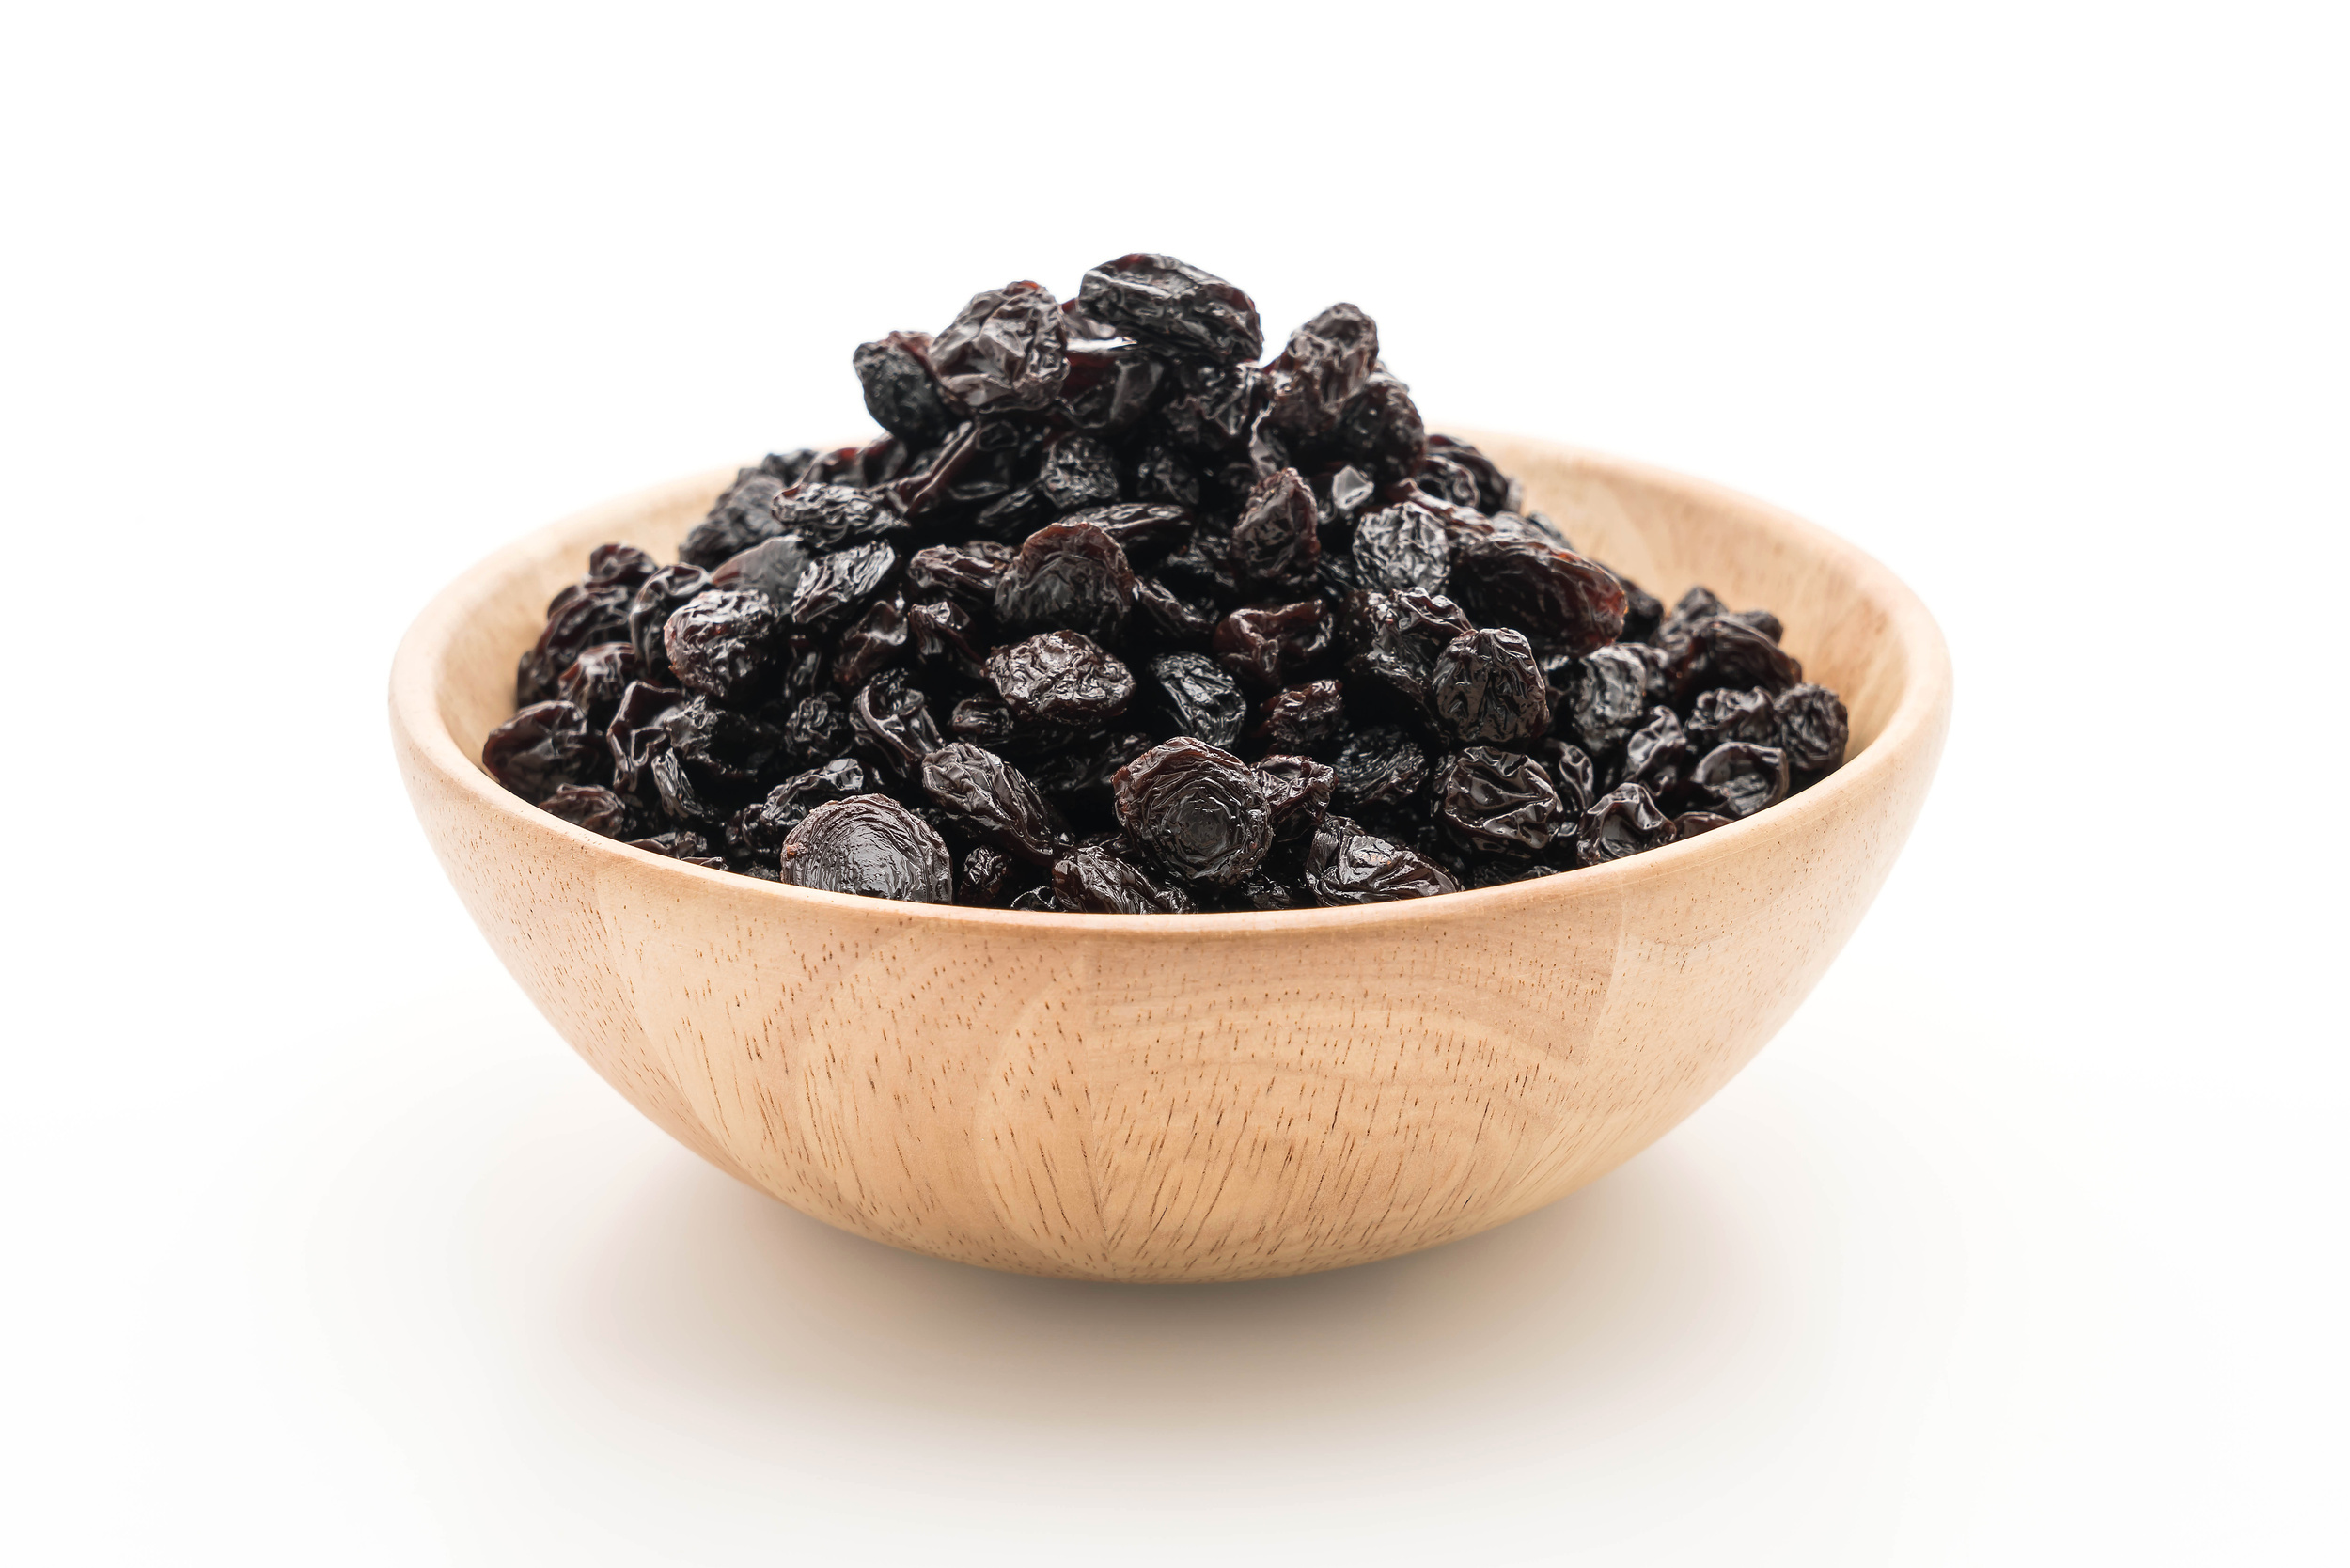 <p>When you want something sweet that’s not candy, raisins are one of your best options. They’re juicer than some other dried fruits, and they contain vitamin C, calcium, iron, potassium, and numerous antioxidants.</p><p><a href='https://www.msn.com/en-us/community/channel/vid-cj9pqbr0vn9in2b6ddcd8sfgpfq6x6utp44fssrv6mc2gtybw0us'>Follow us on MSN to see more of our exclusive lifestyle content.</a></p>